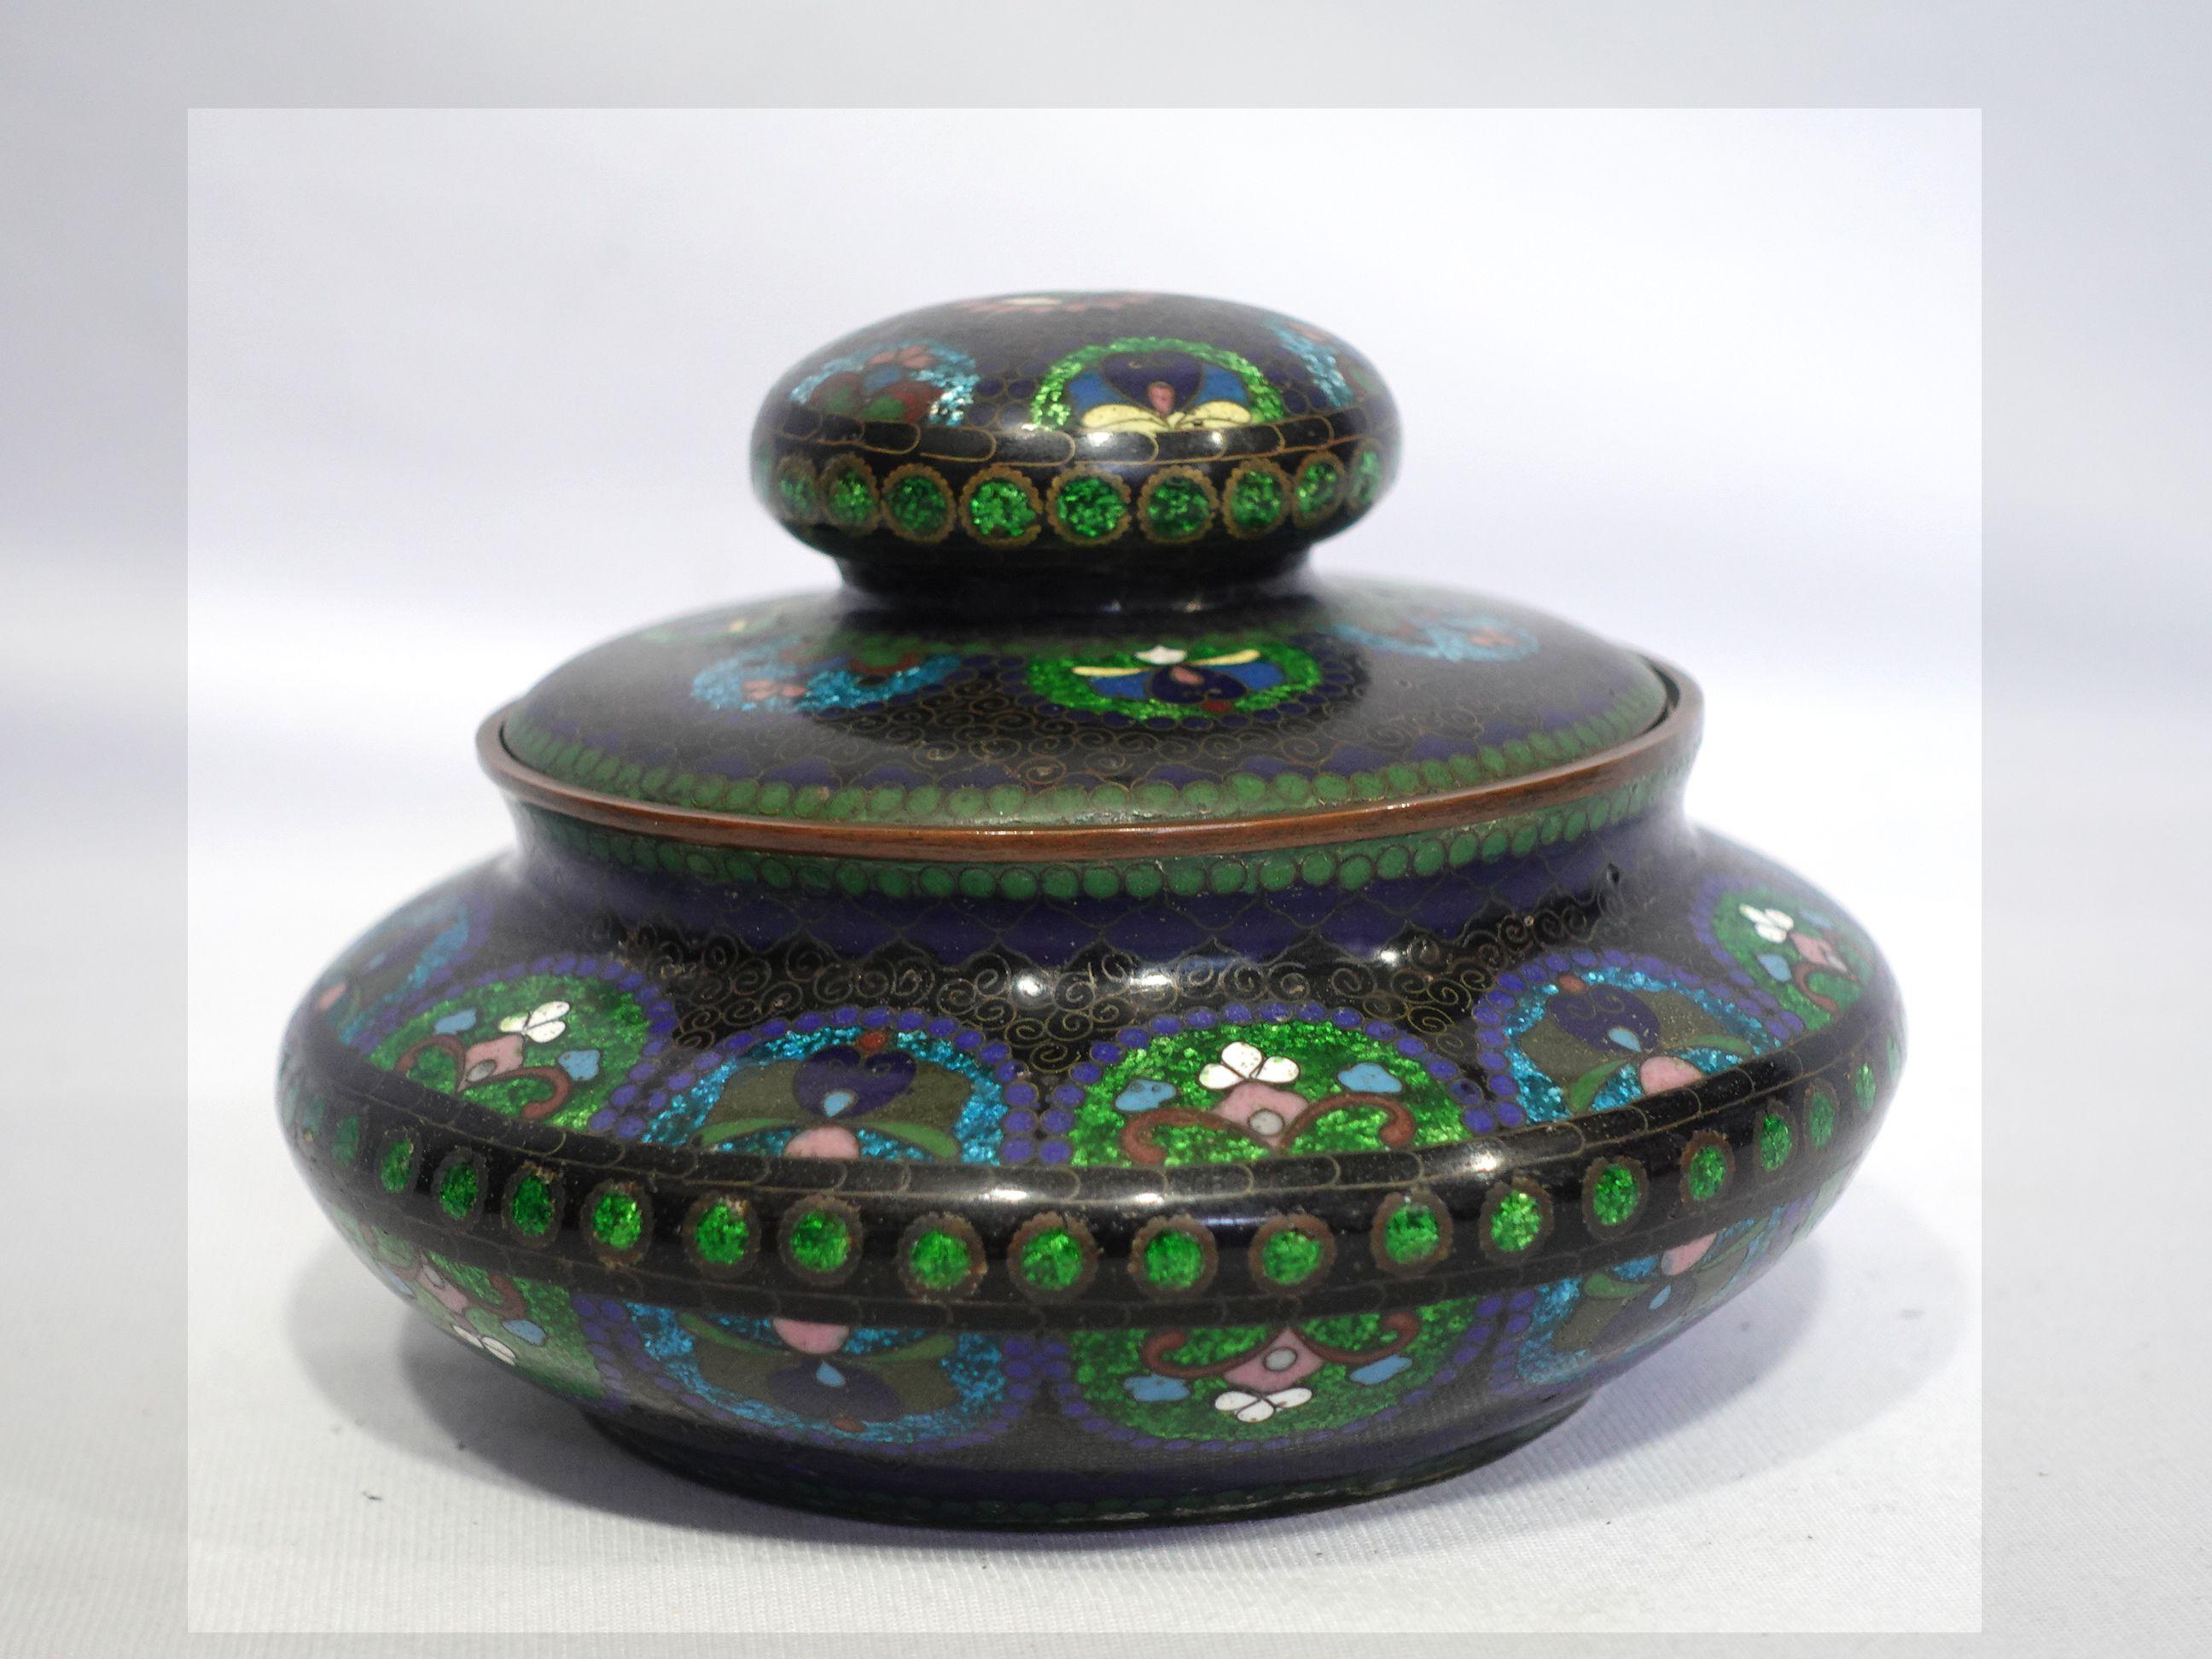 Quality work, amazing workmanship with absolutely fine details bronze cloisonné enameled lidded box depicting lots of intricated patterns all around the body with vivid colors of cyan, blue, light golden green, red, and brown.
4.25